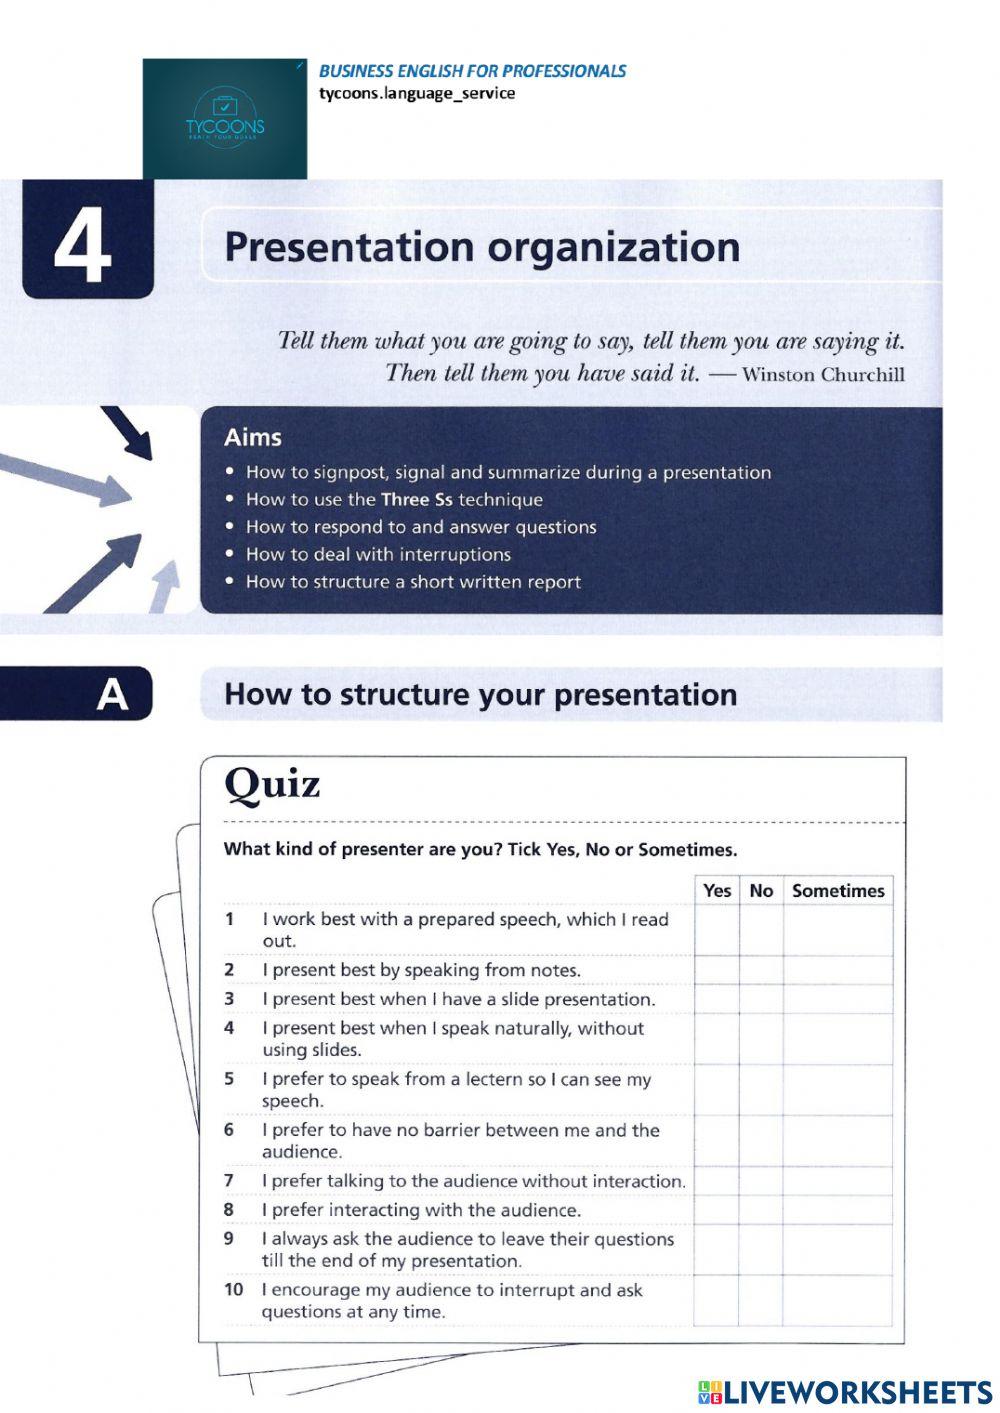 Structure of presentations